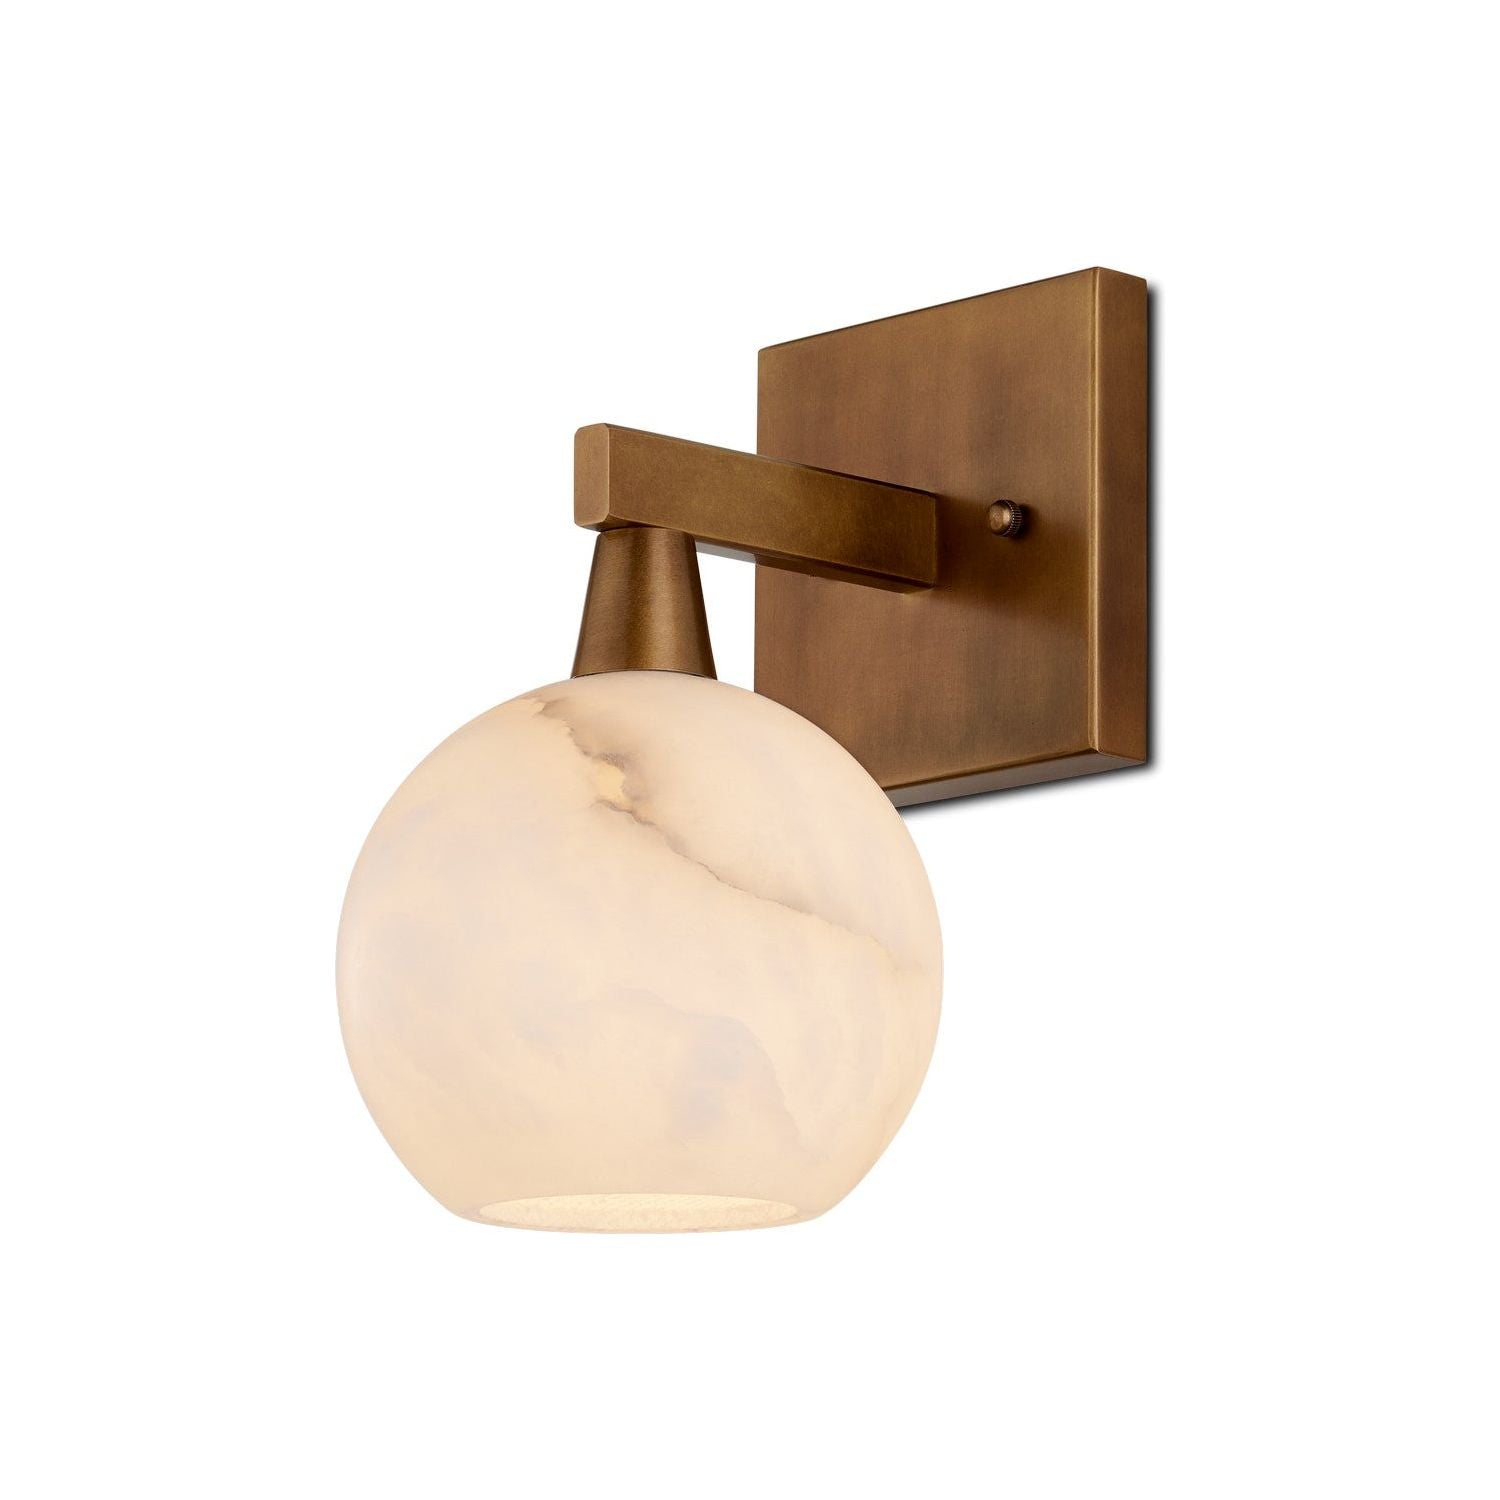 Currey and Company - 5800-0041 - One Light Wall Sconce - Antique Brass/Natural